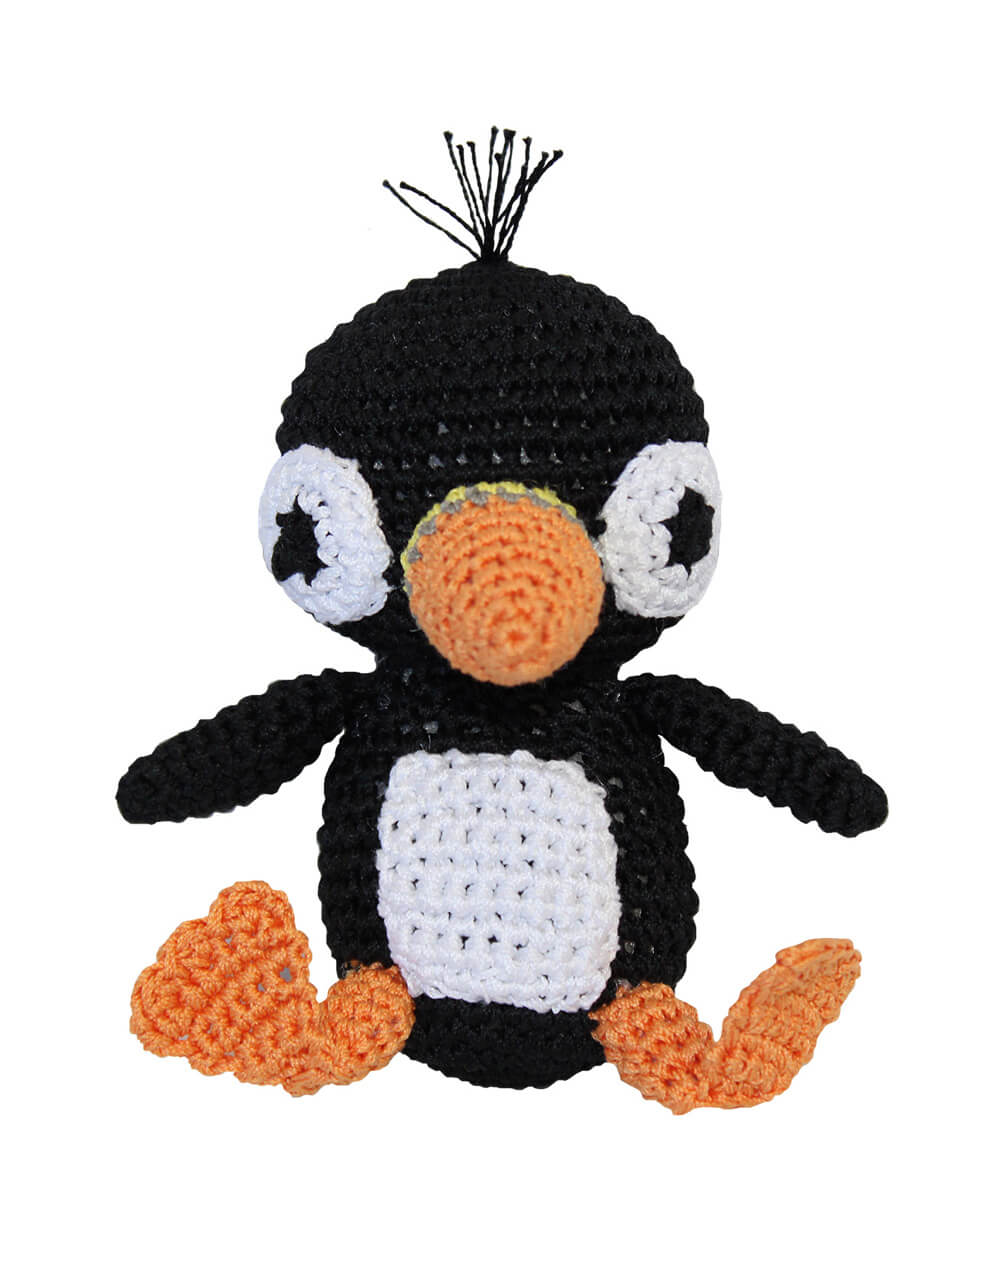 Knit Knacks &quot;Pumpkin the Puffin&quot; handmade organic cotton dog toy. Black and white puffin bird with an orange beak and orange feet.